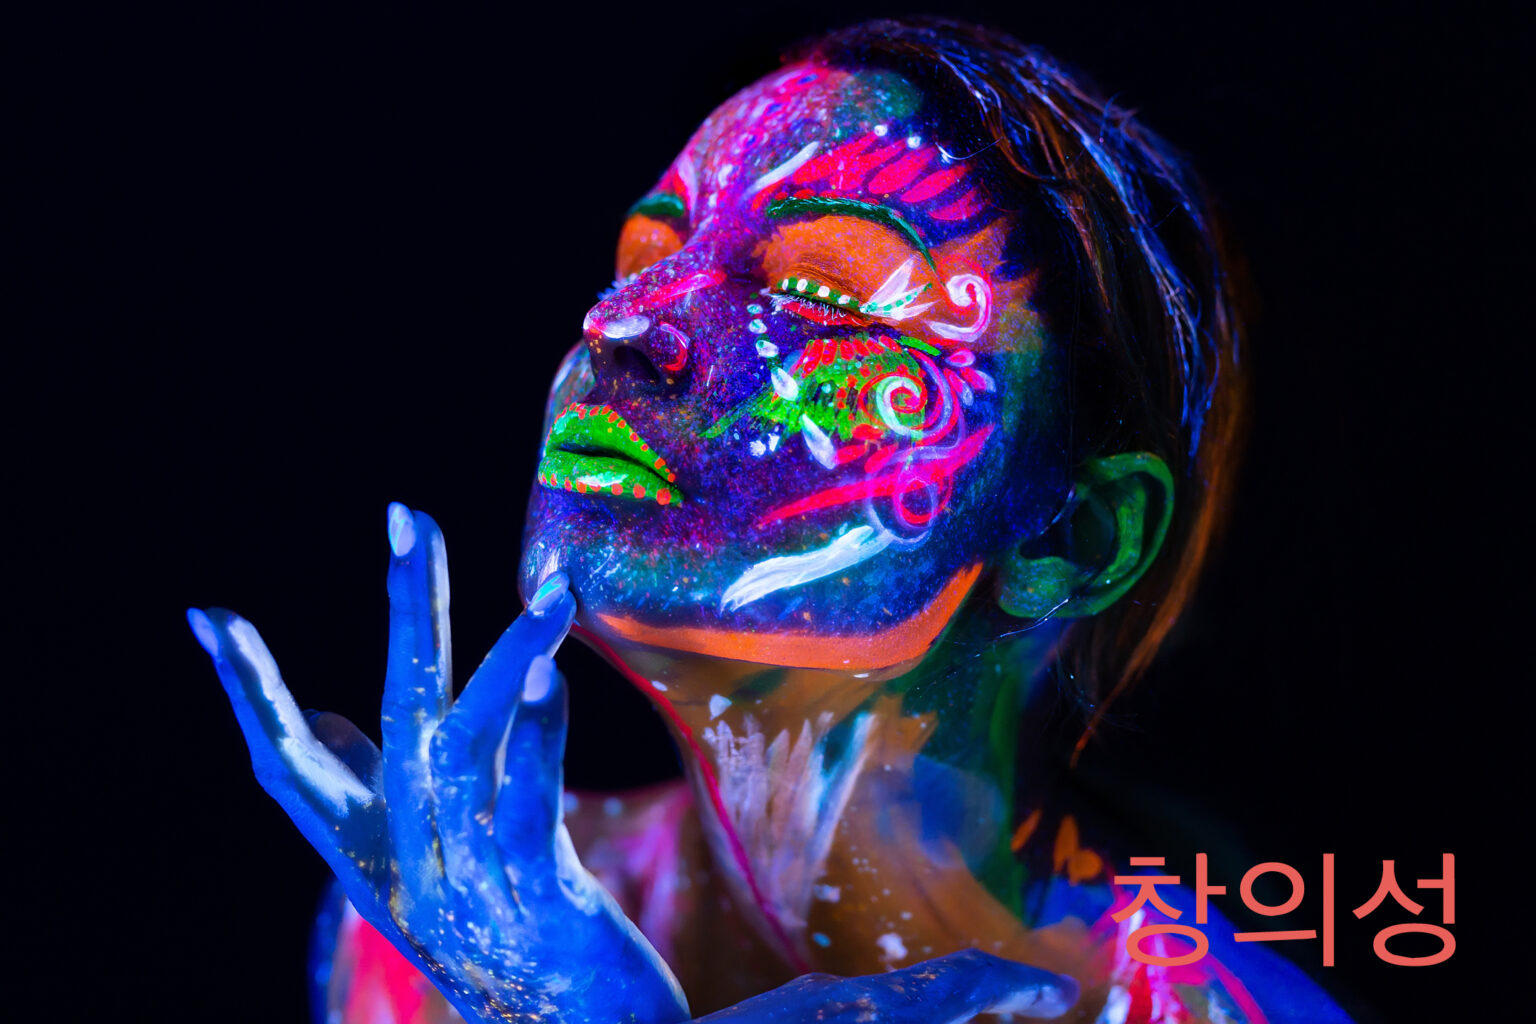 Granite Bay Graphic Design: Creativity: Image of a Woman’s Face with Brightly Colored Face Paint in Black Light